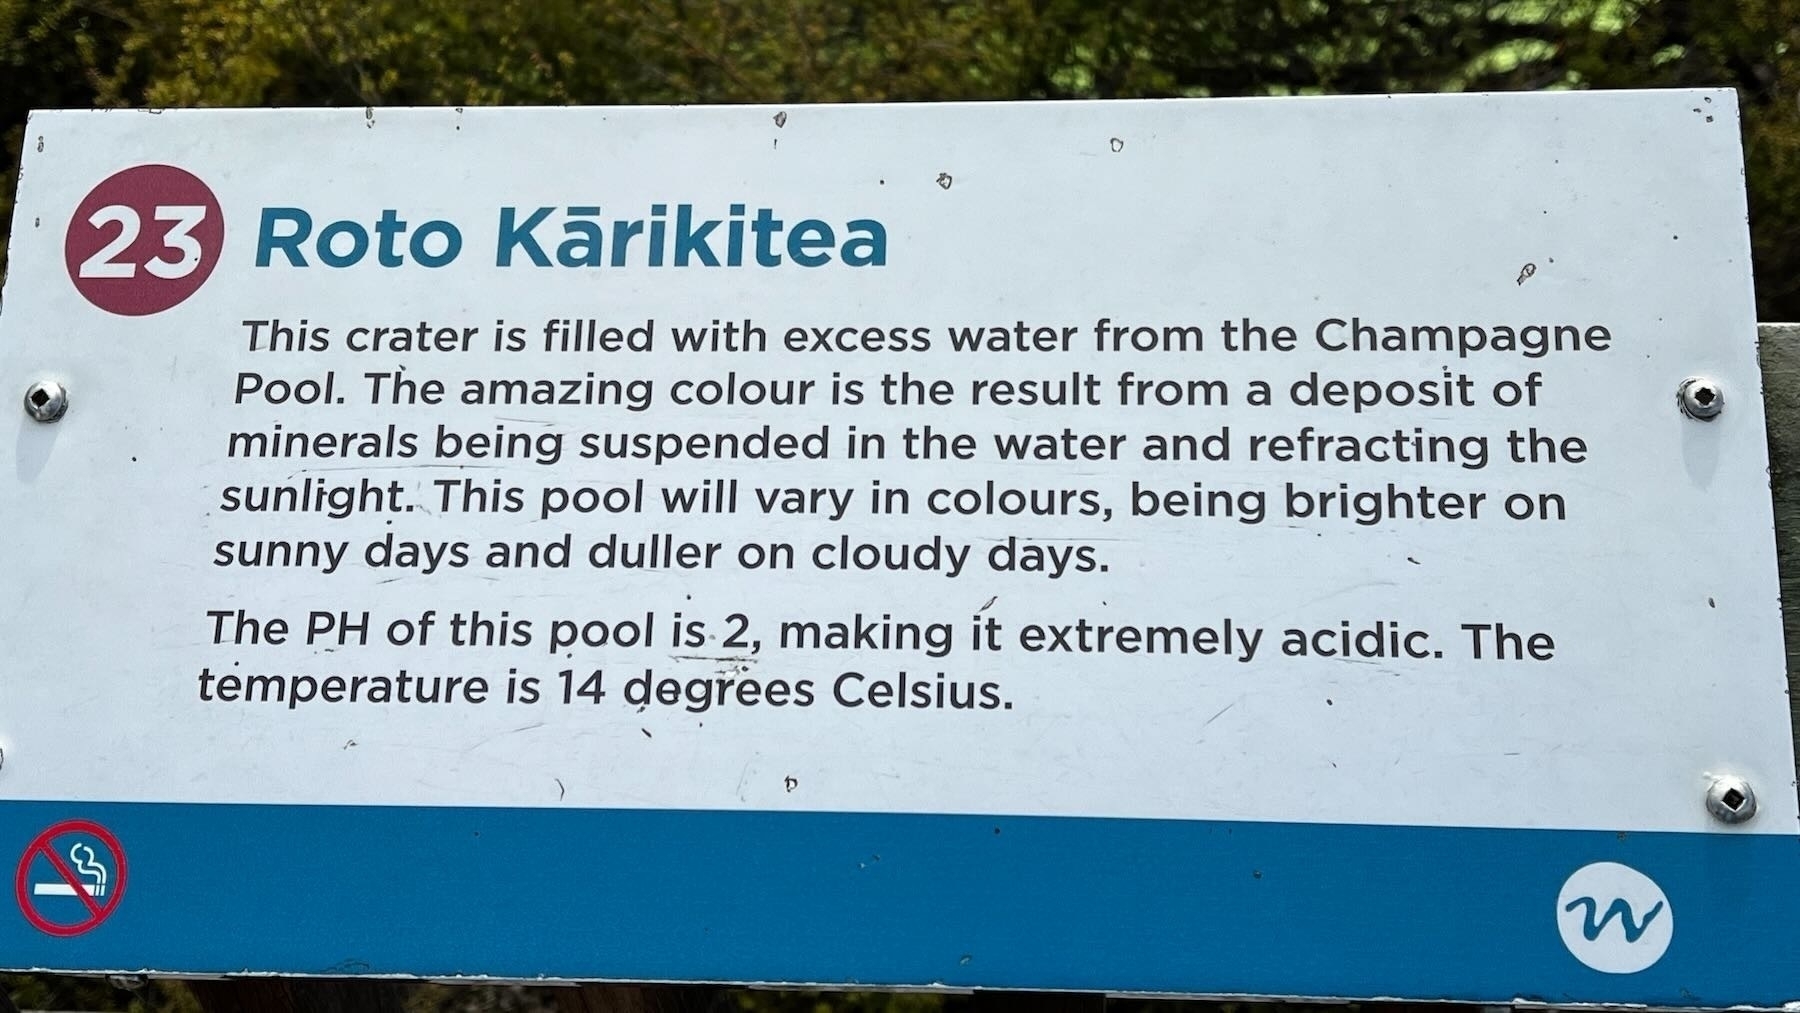 Info board explains the yellow of the lake comes from suspended minerals. 